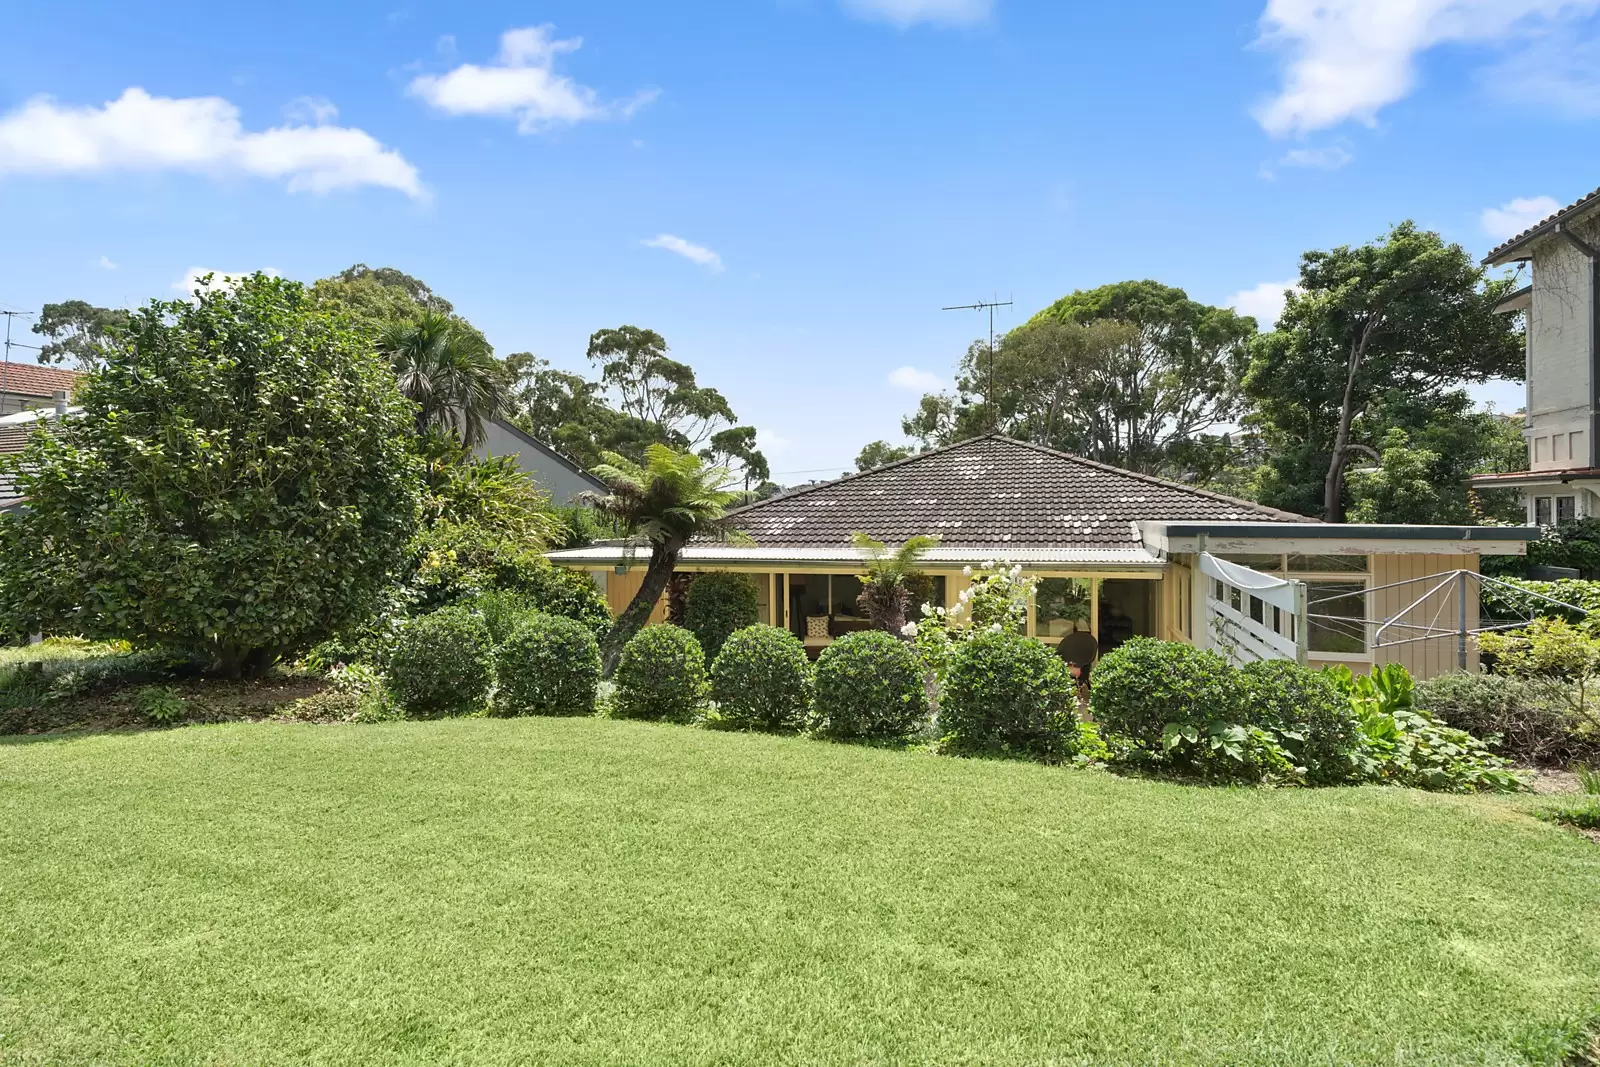 Photo #5: 5 Parsley Road, Vaucluse - Sold by Sydney Sotheby's International Realty